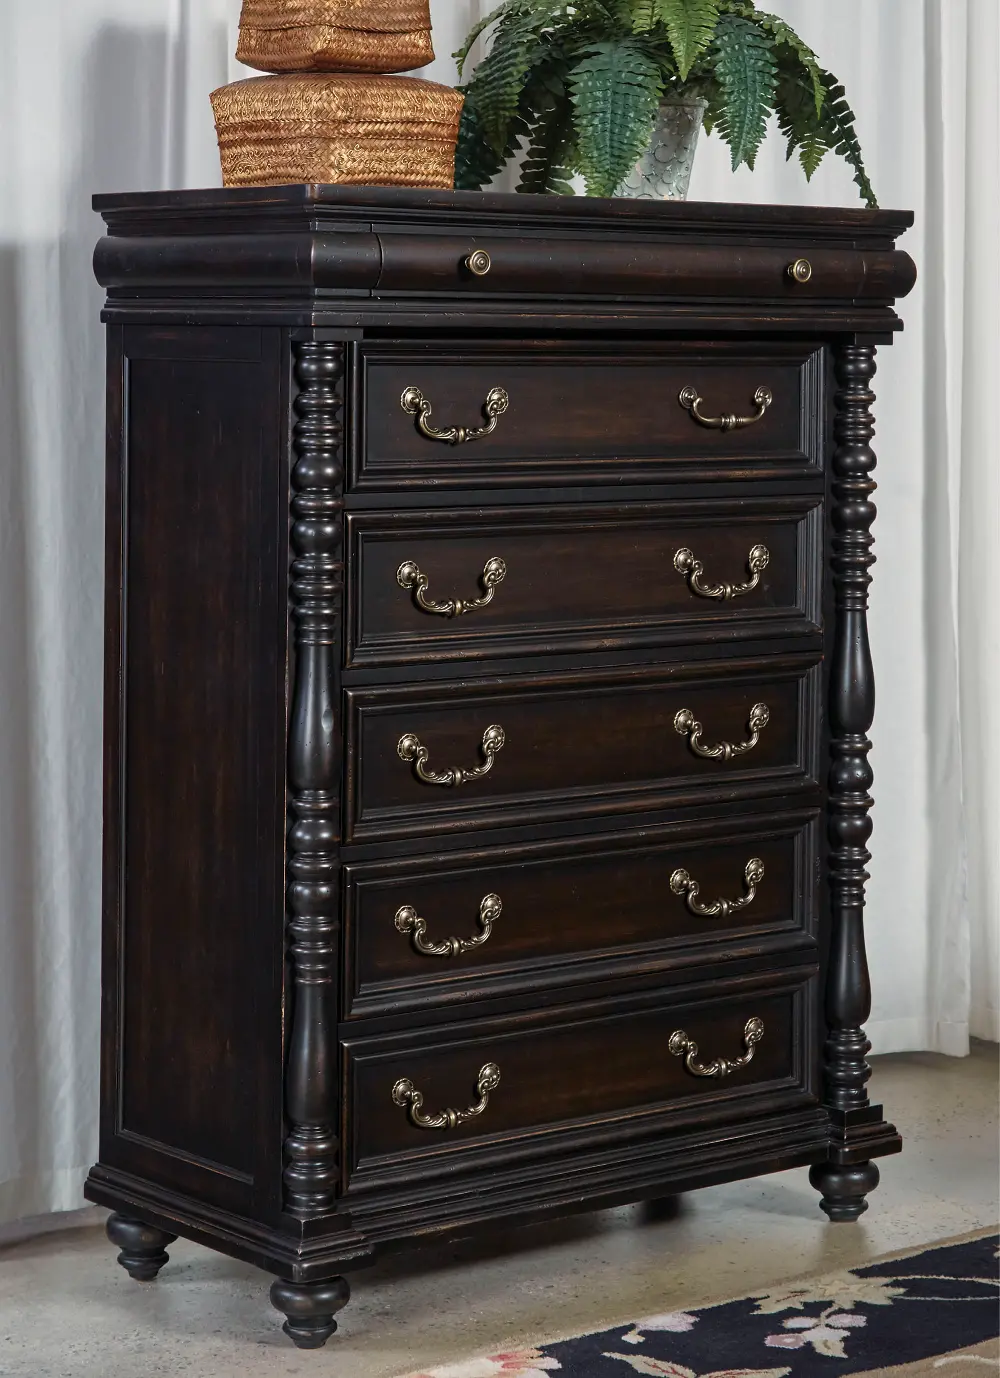 Cabernet Black Traditional Chest of Drawers - Meritage-1